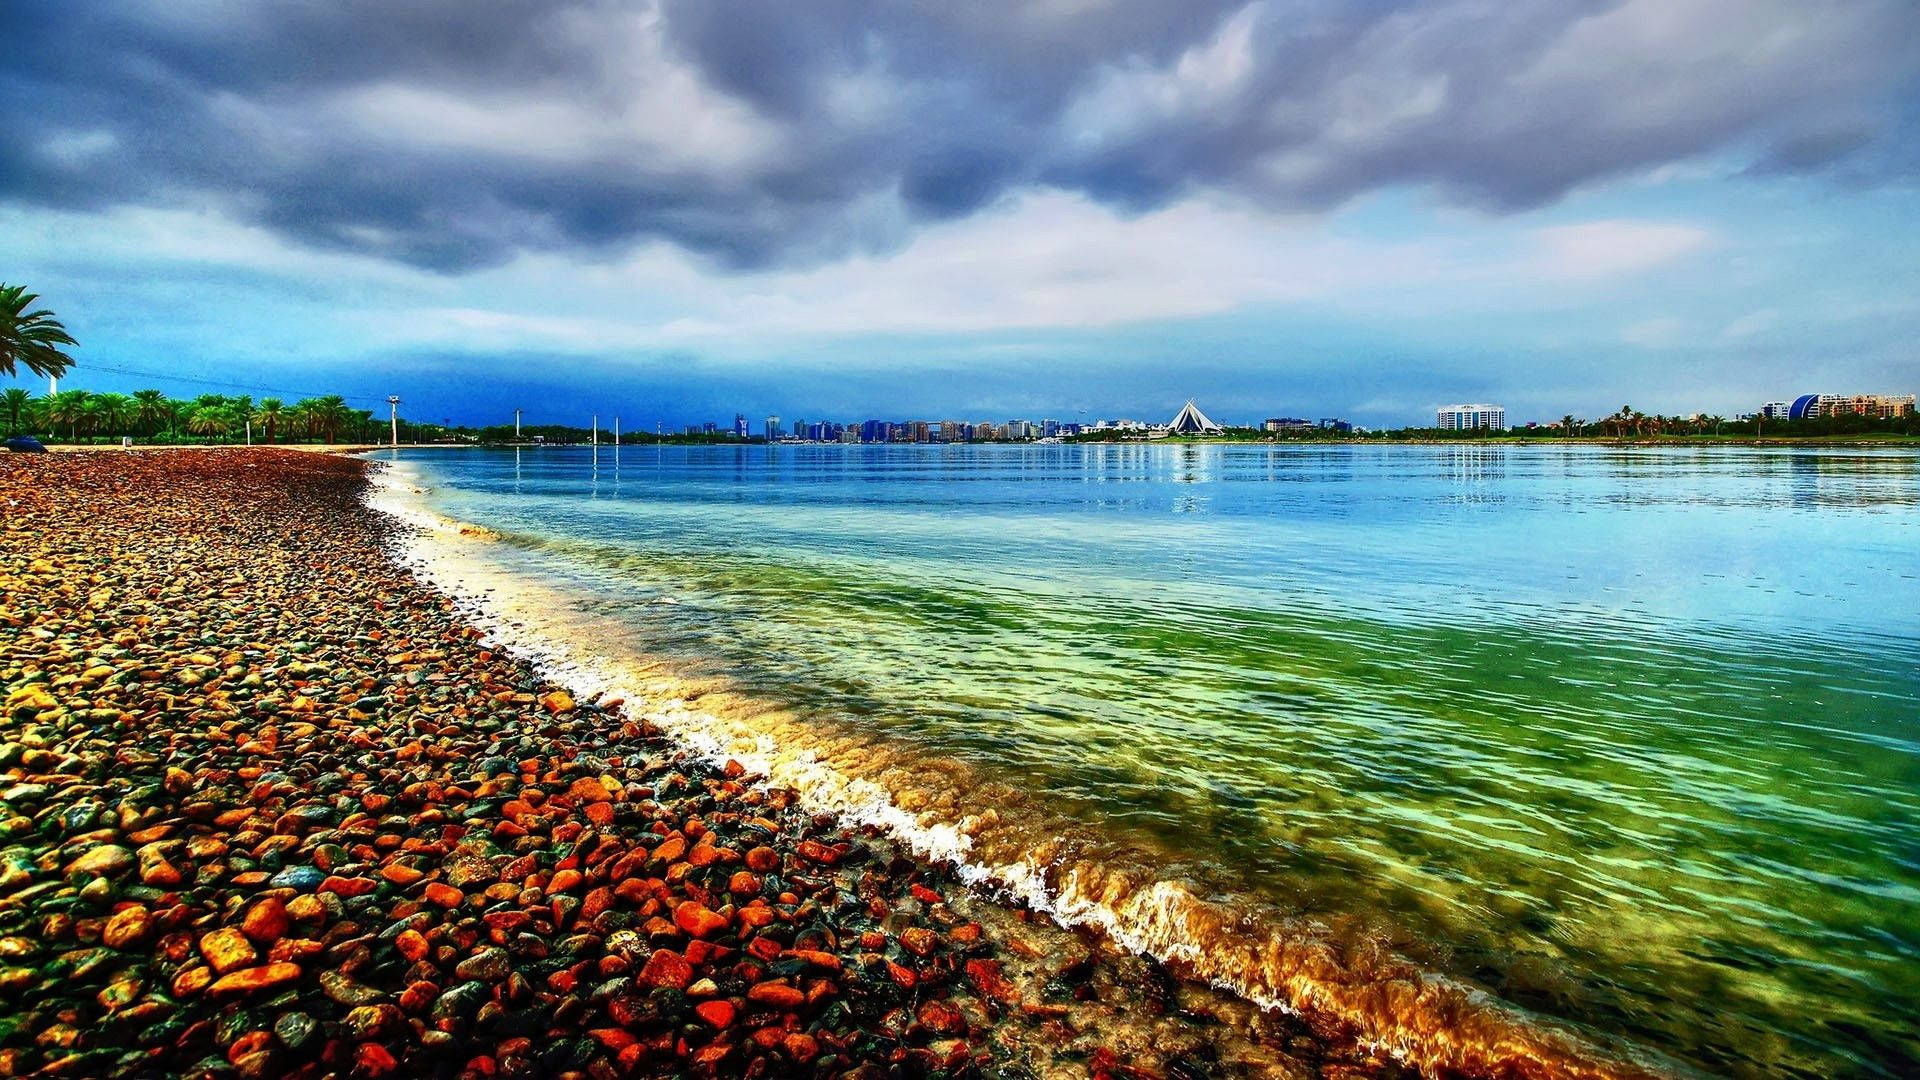 Seagrass between waves of colorful gravel along the shoreline of a beach. Wallpaper